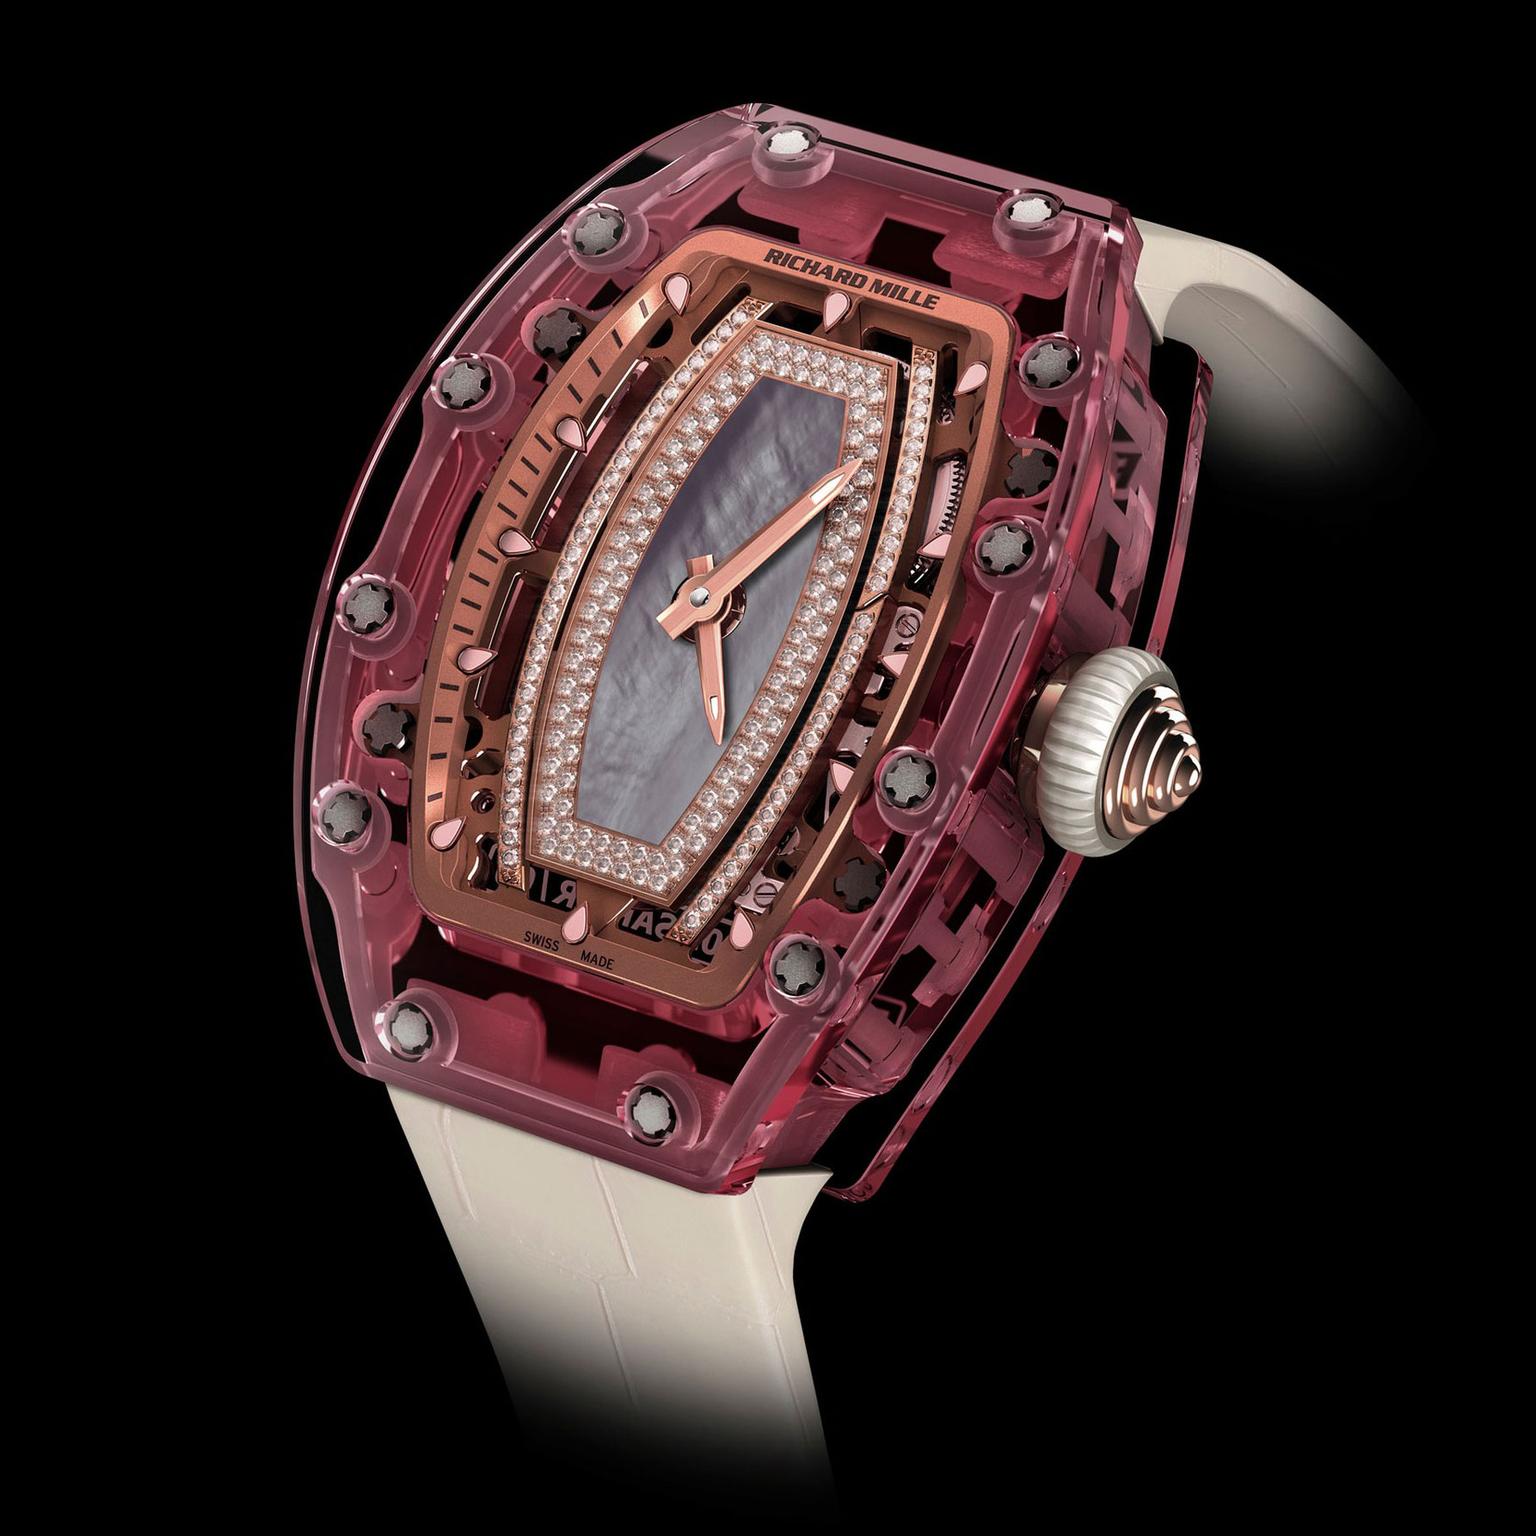 New Richard Mille watch for women exude 